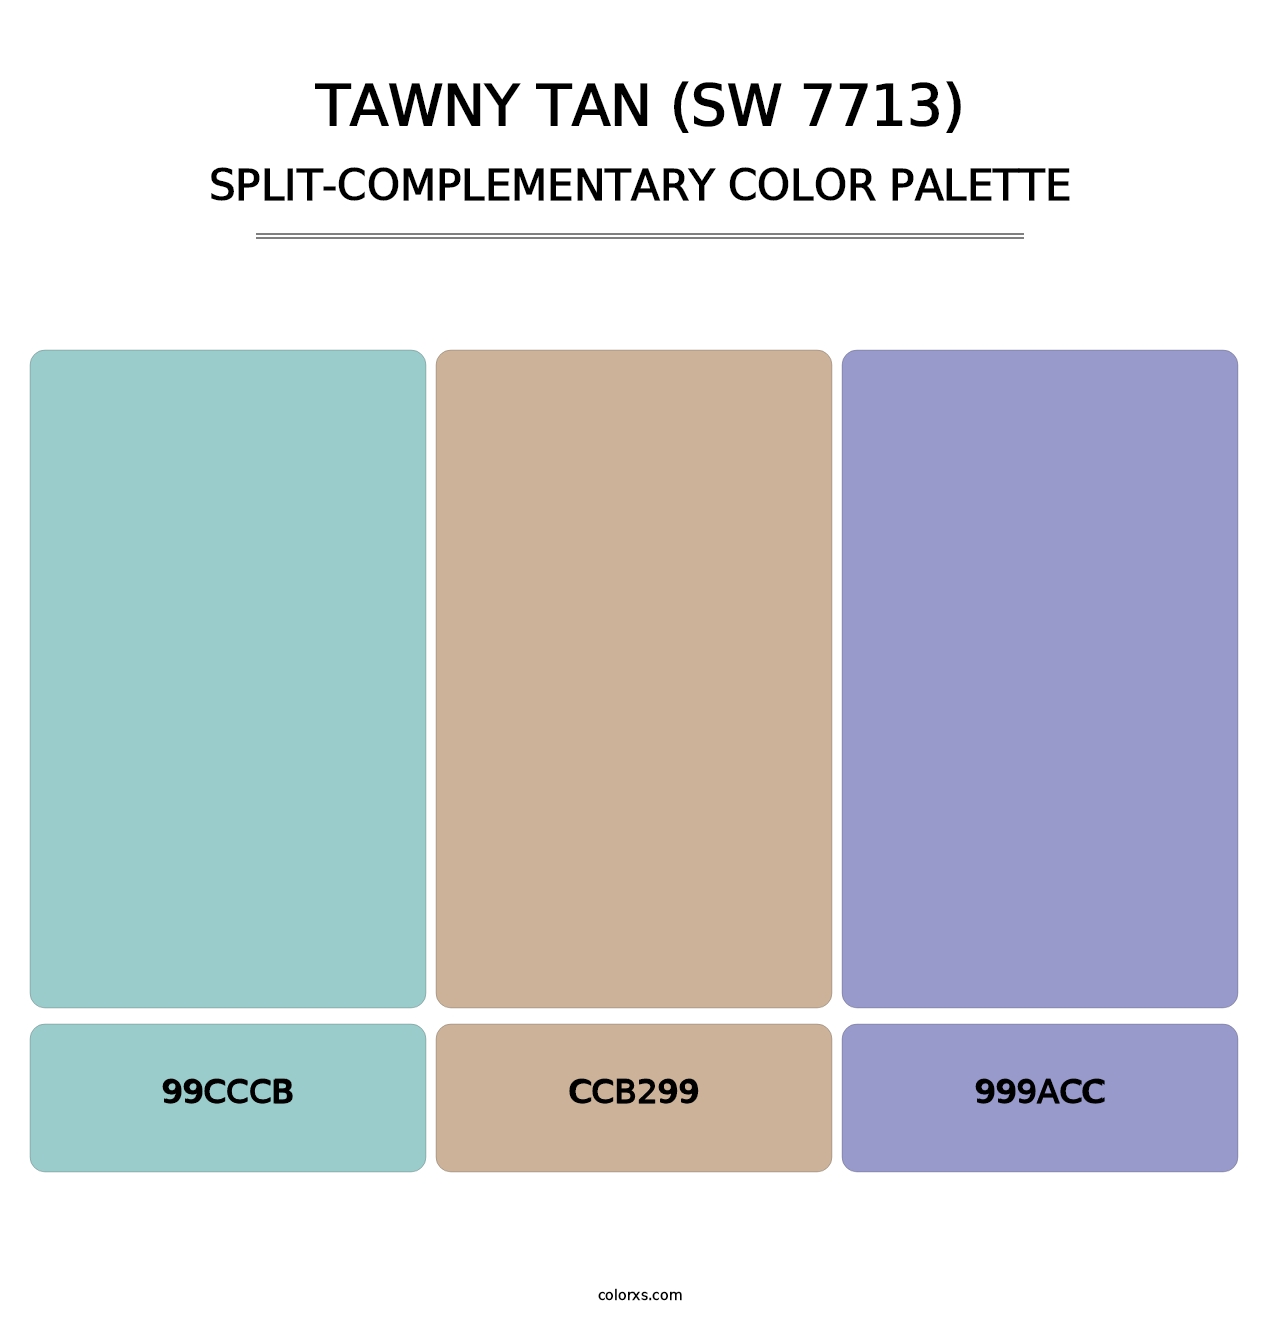 Tawny Tan (SW 7713) - Split-Complementary Color Palette